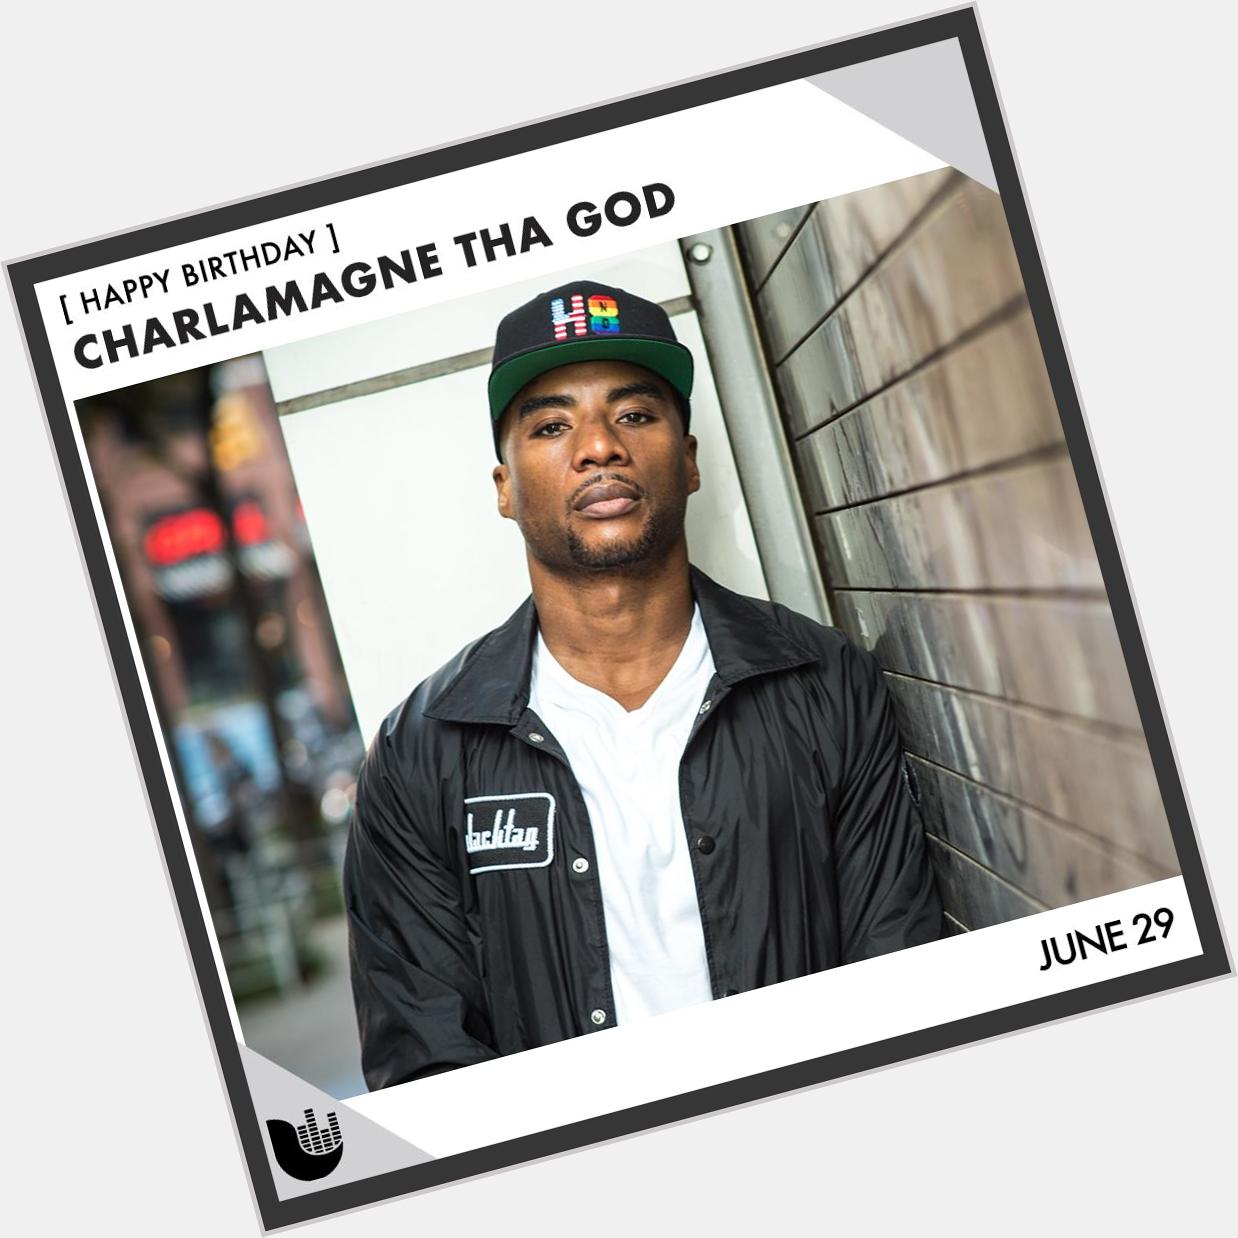 Join 98.5 The Beat in wishing a happy birthday to Charlamagne Tha God! 